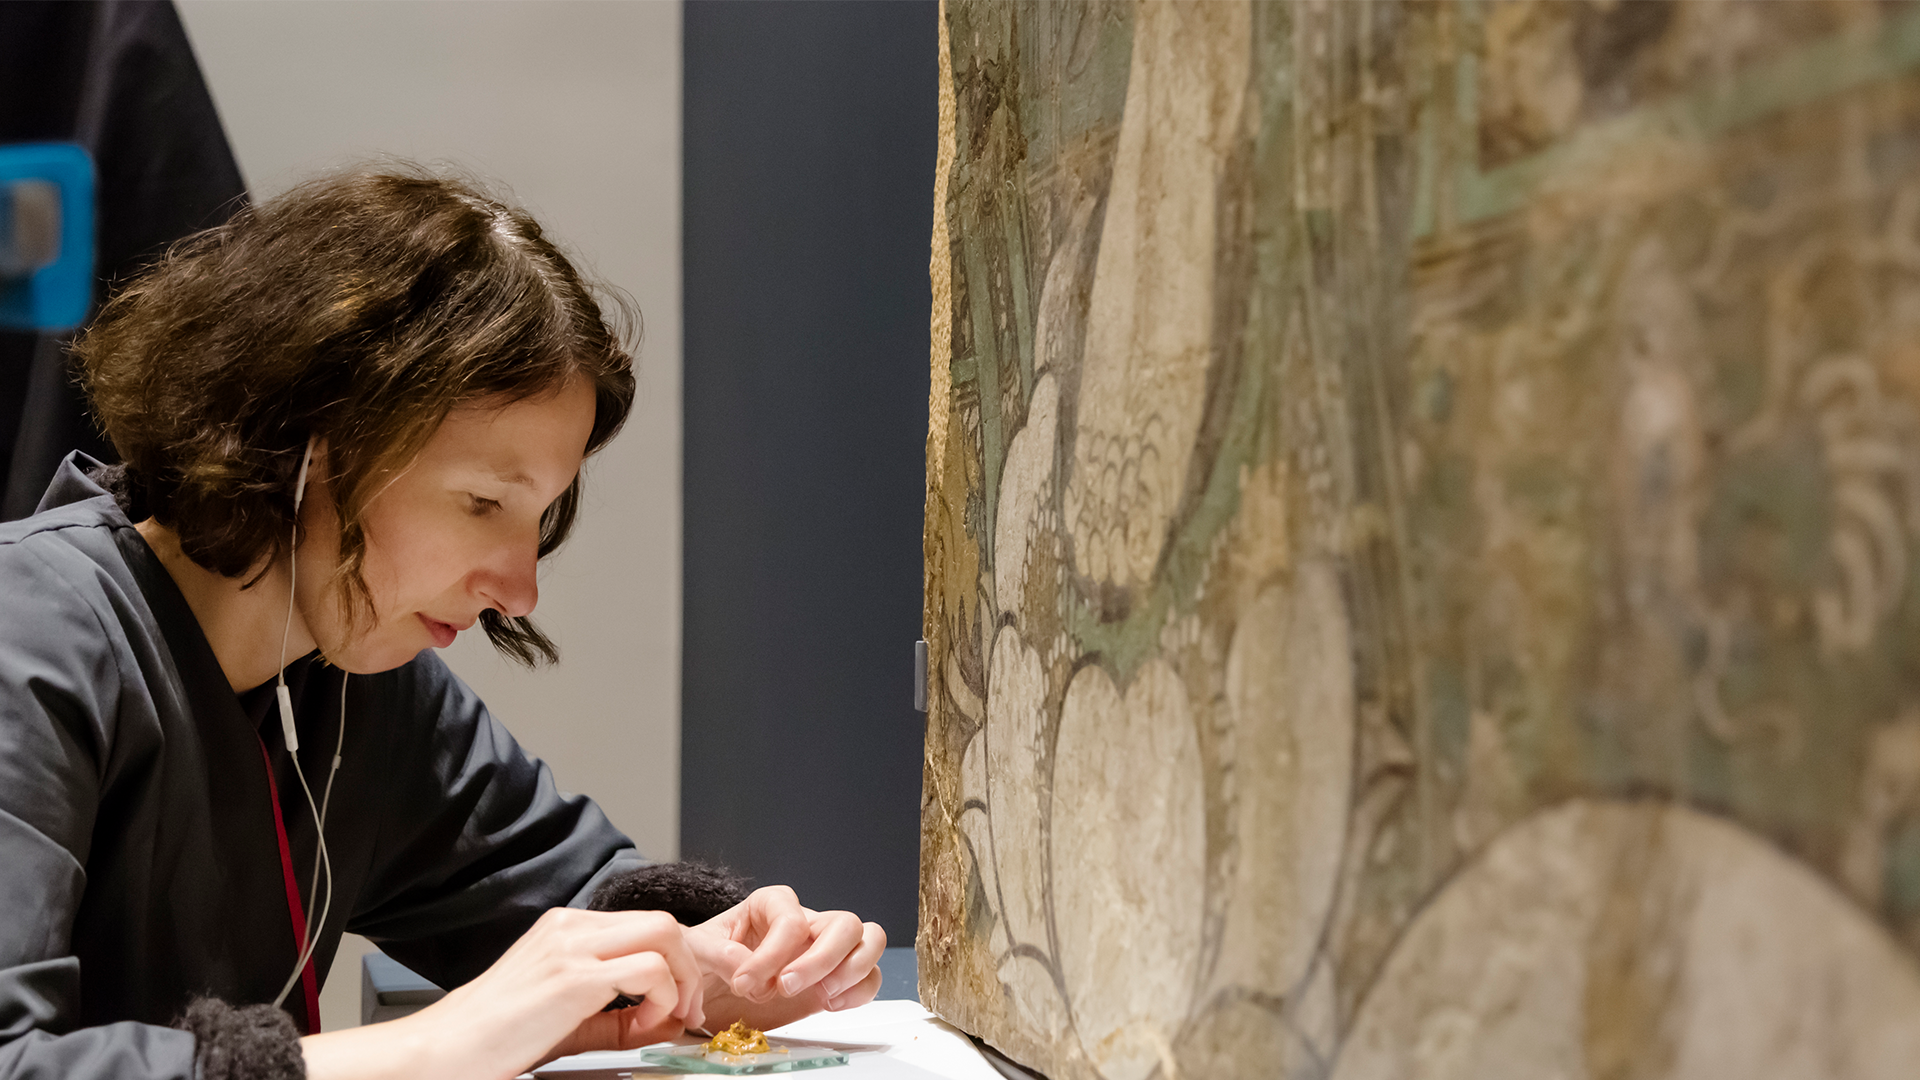 A conservator wearing white headphones mixes up a small mound of gold paint next to a large painted work